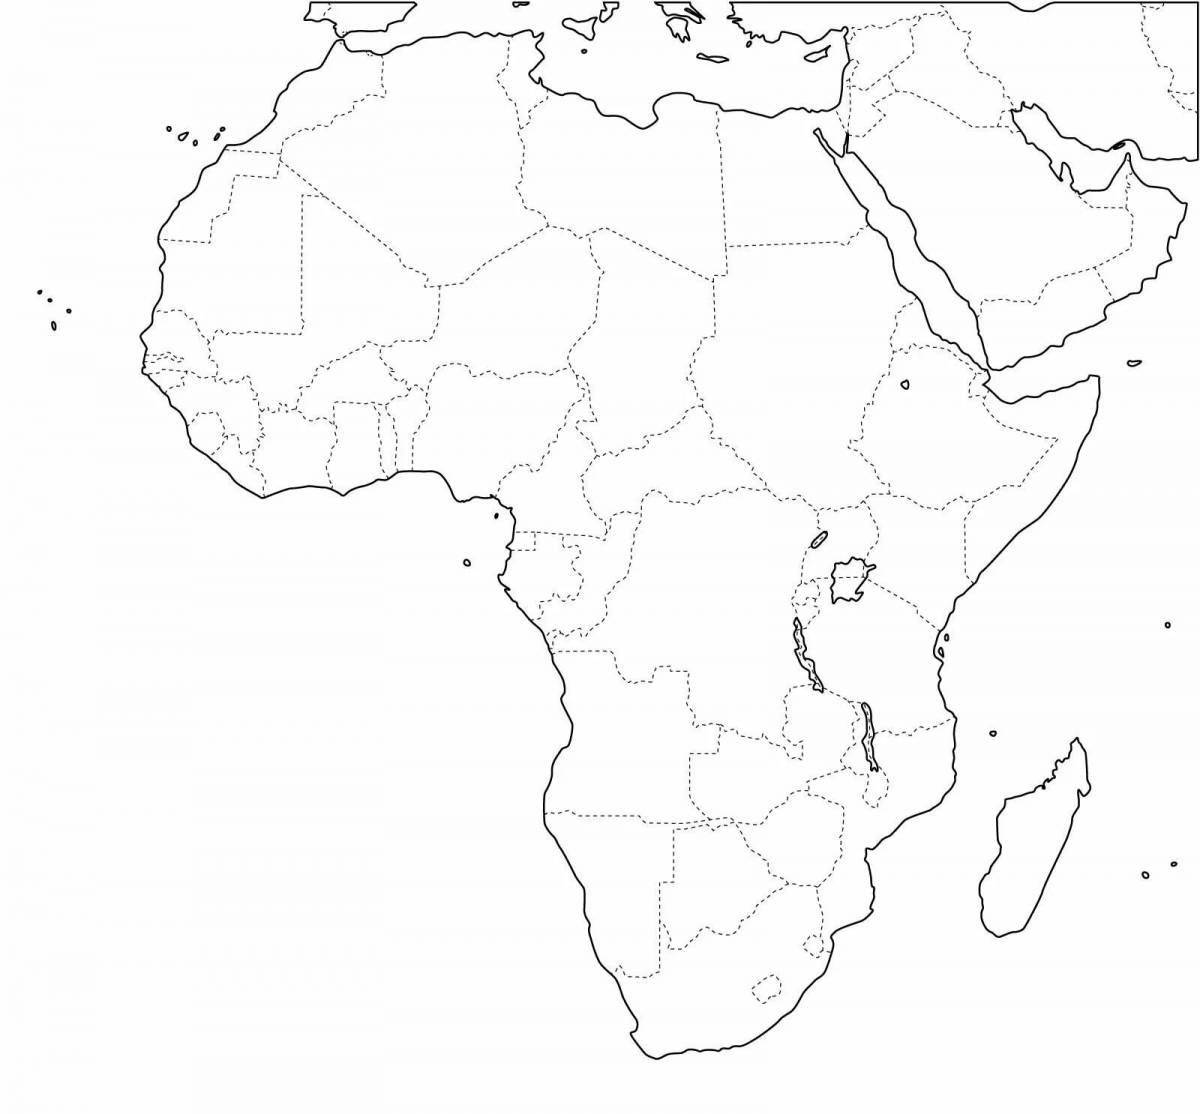 Coloring book wonderful map of africa